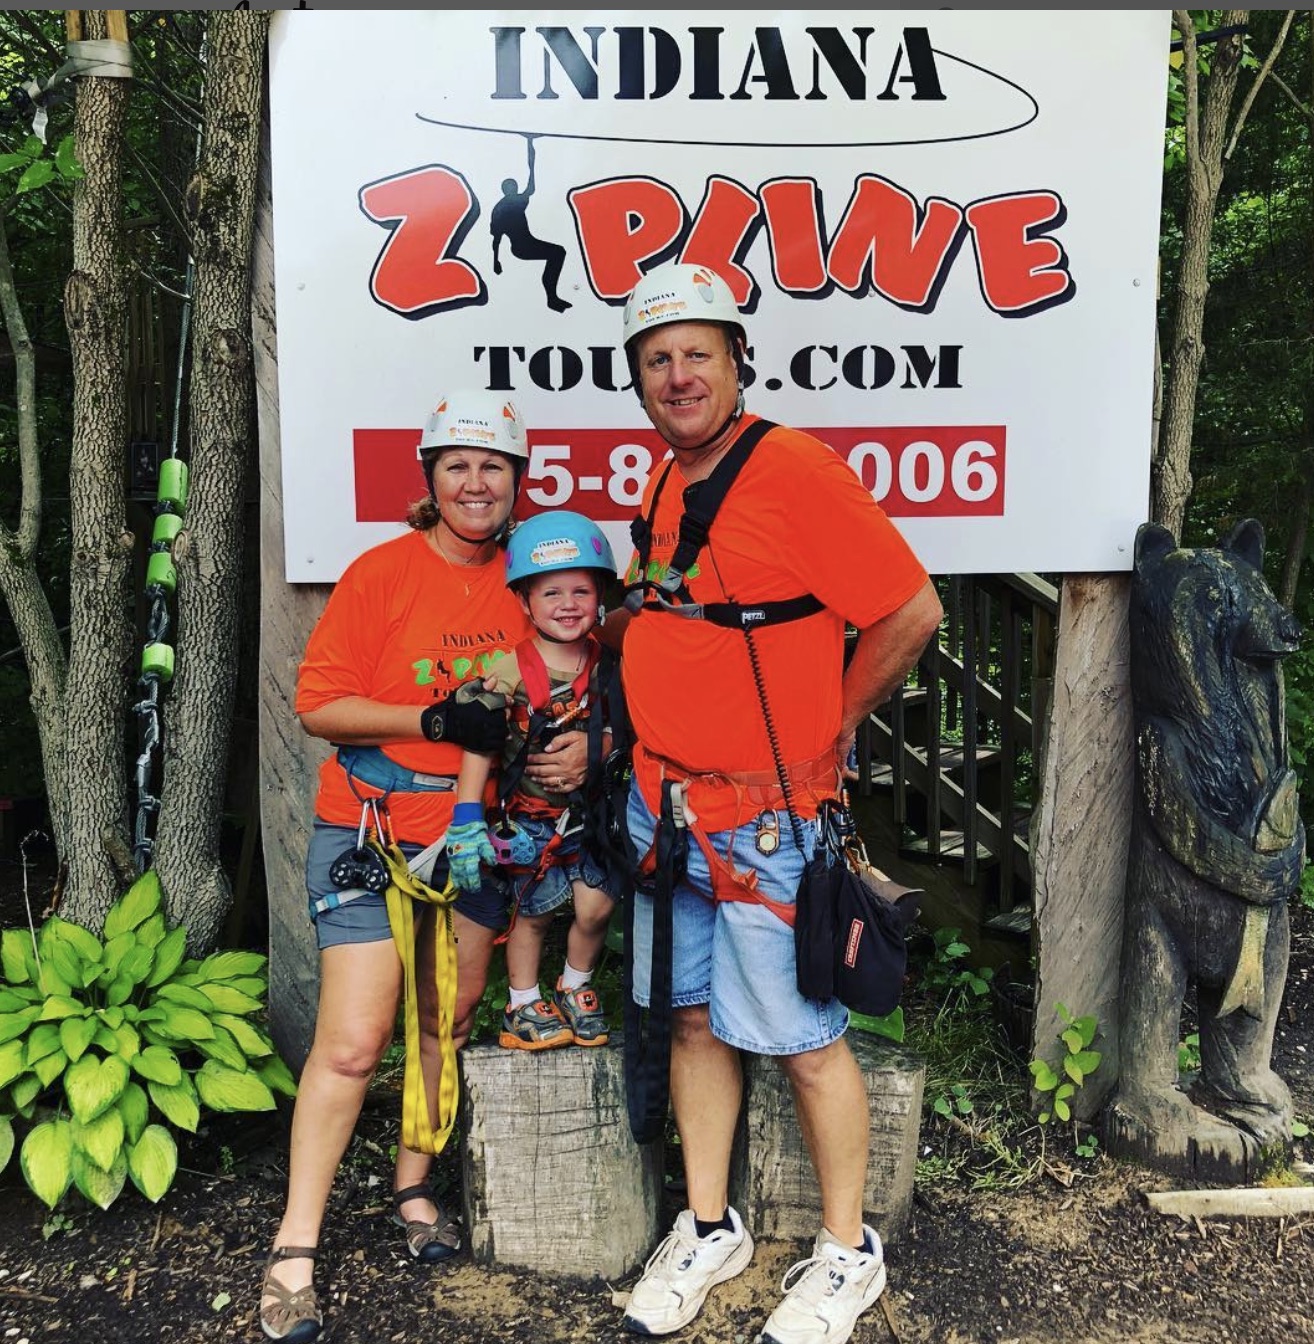 A family about to zipline